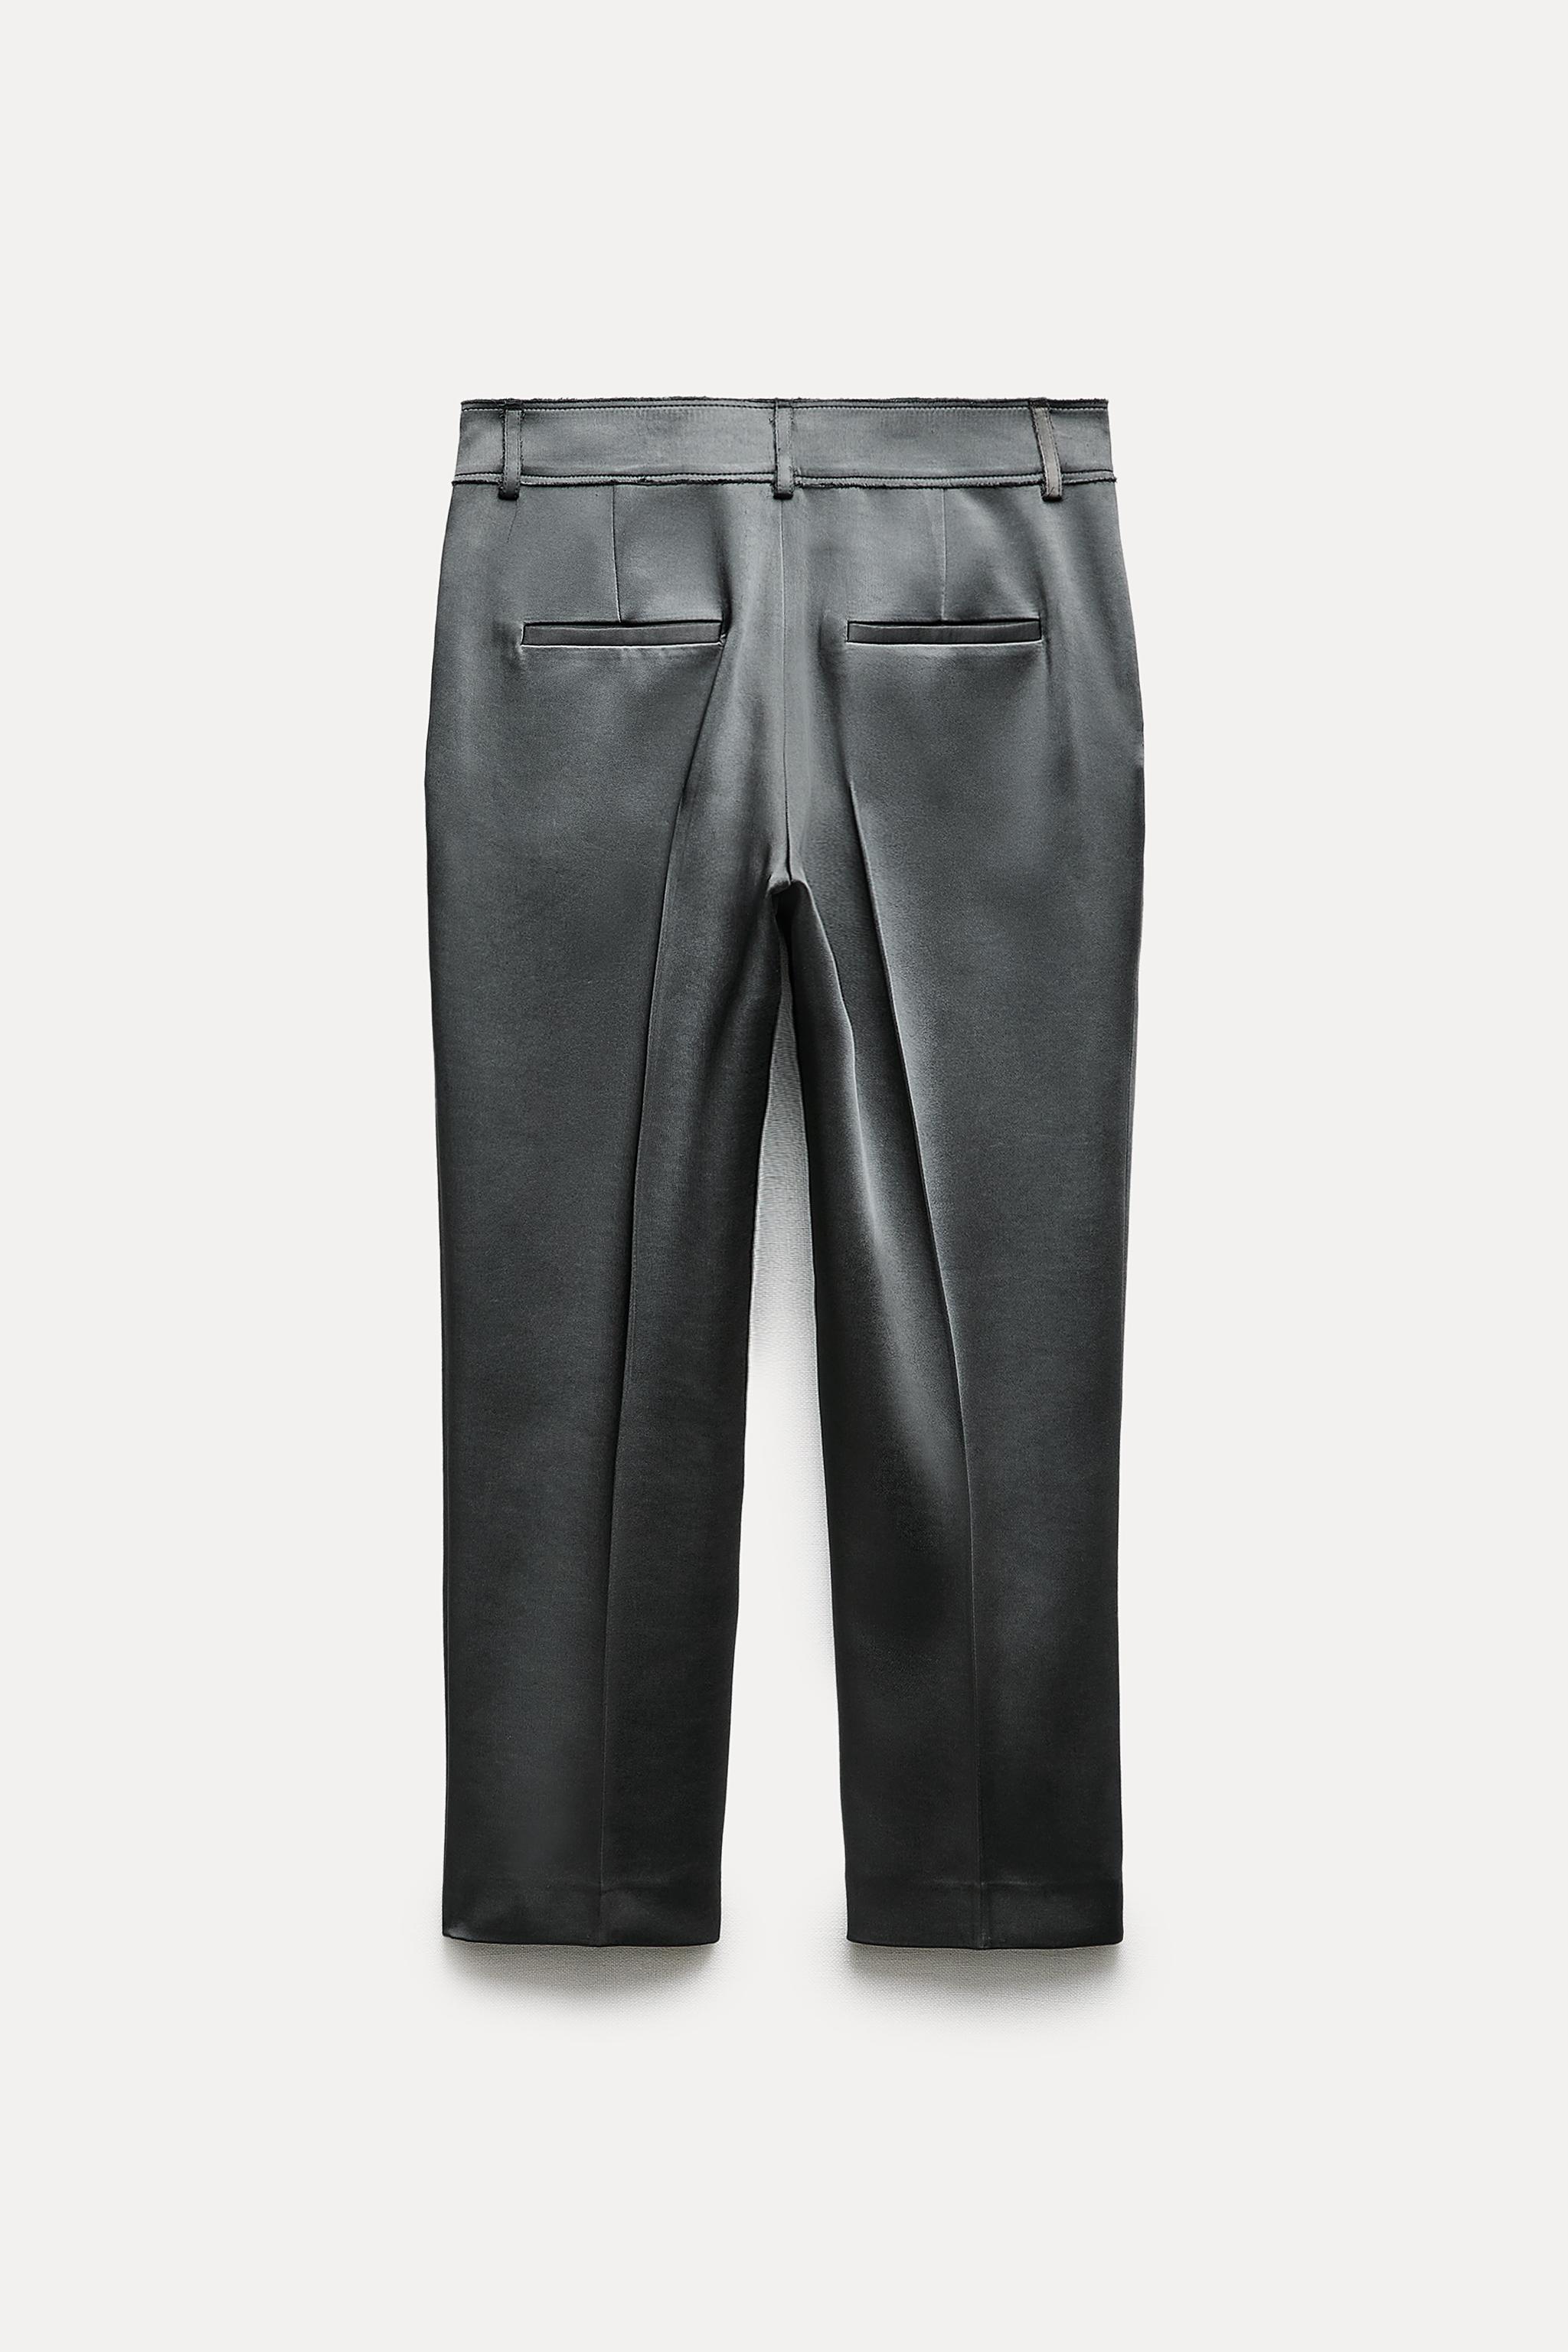 ZW COLLECTION HEAVY SATIN TROUSERS - Anthracite grey